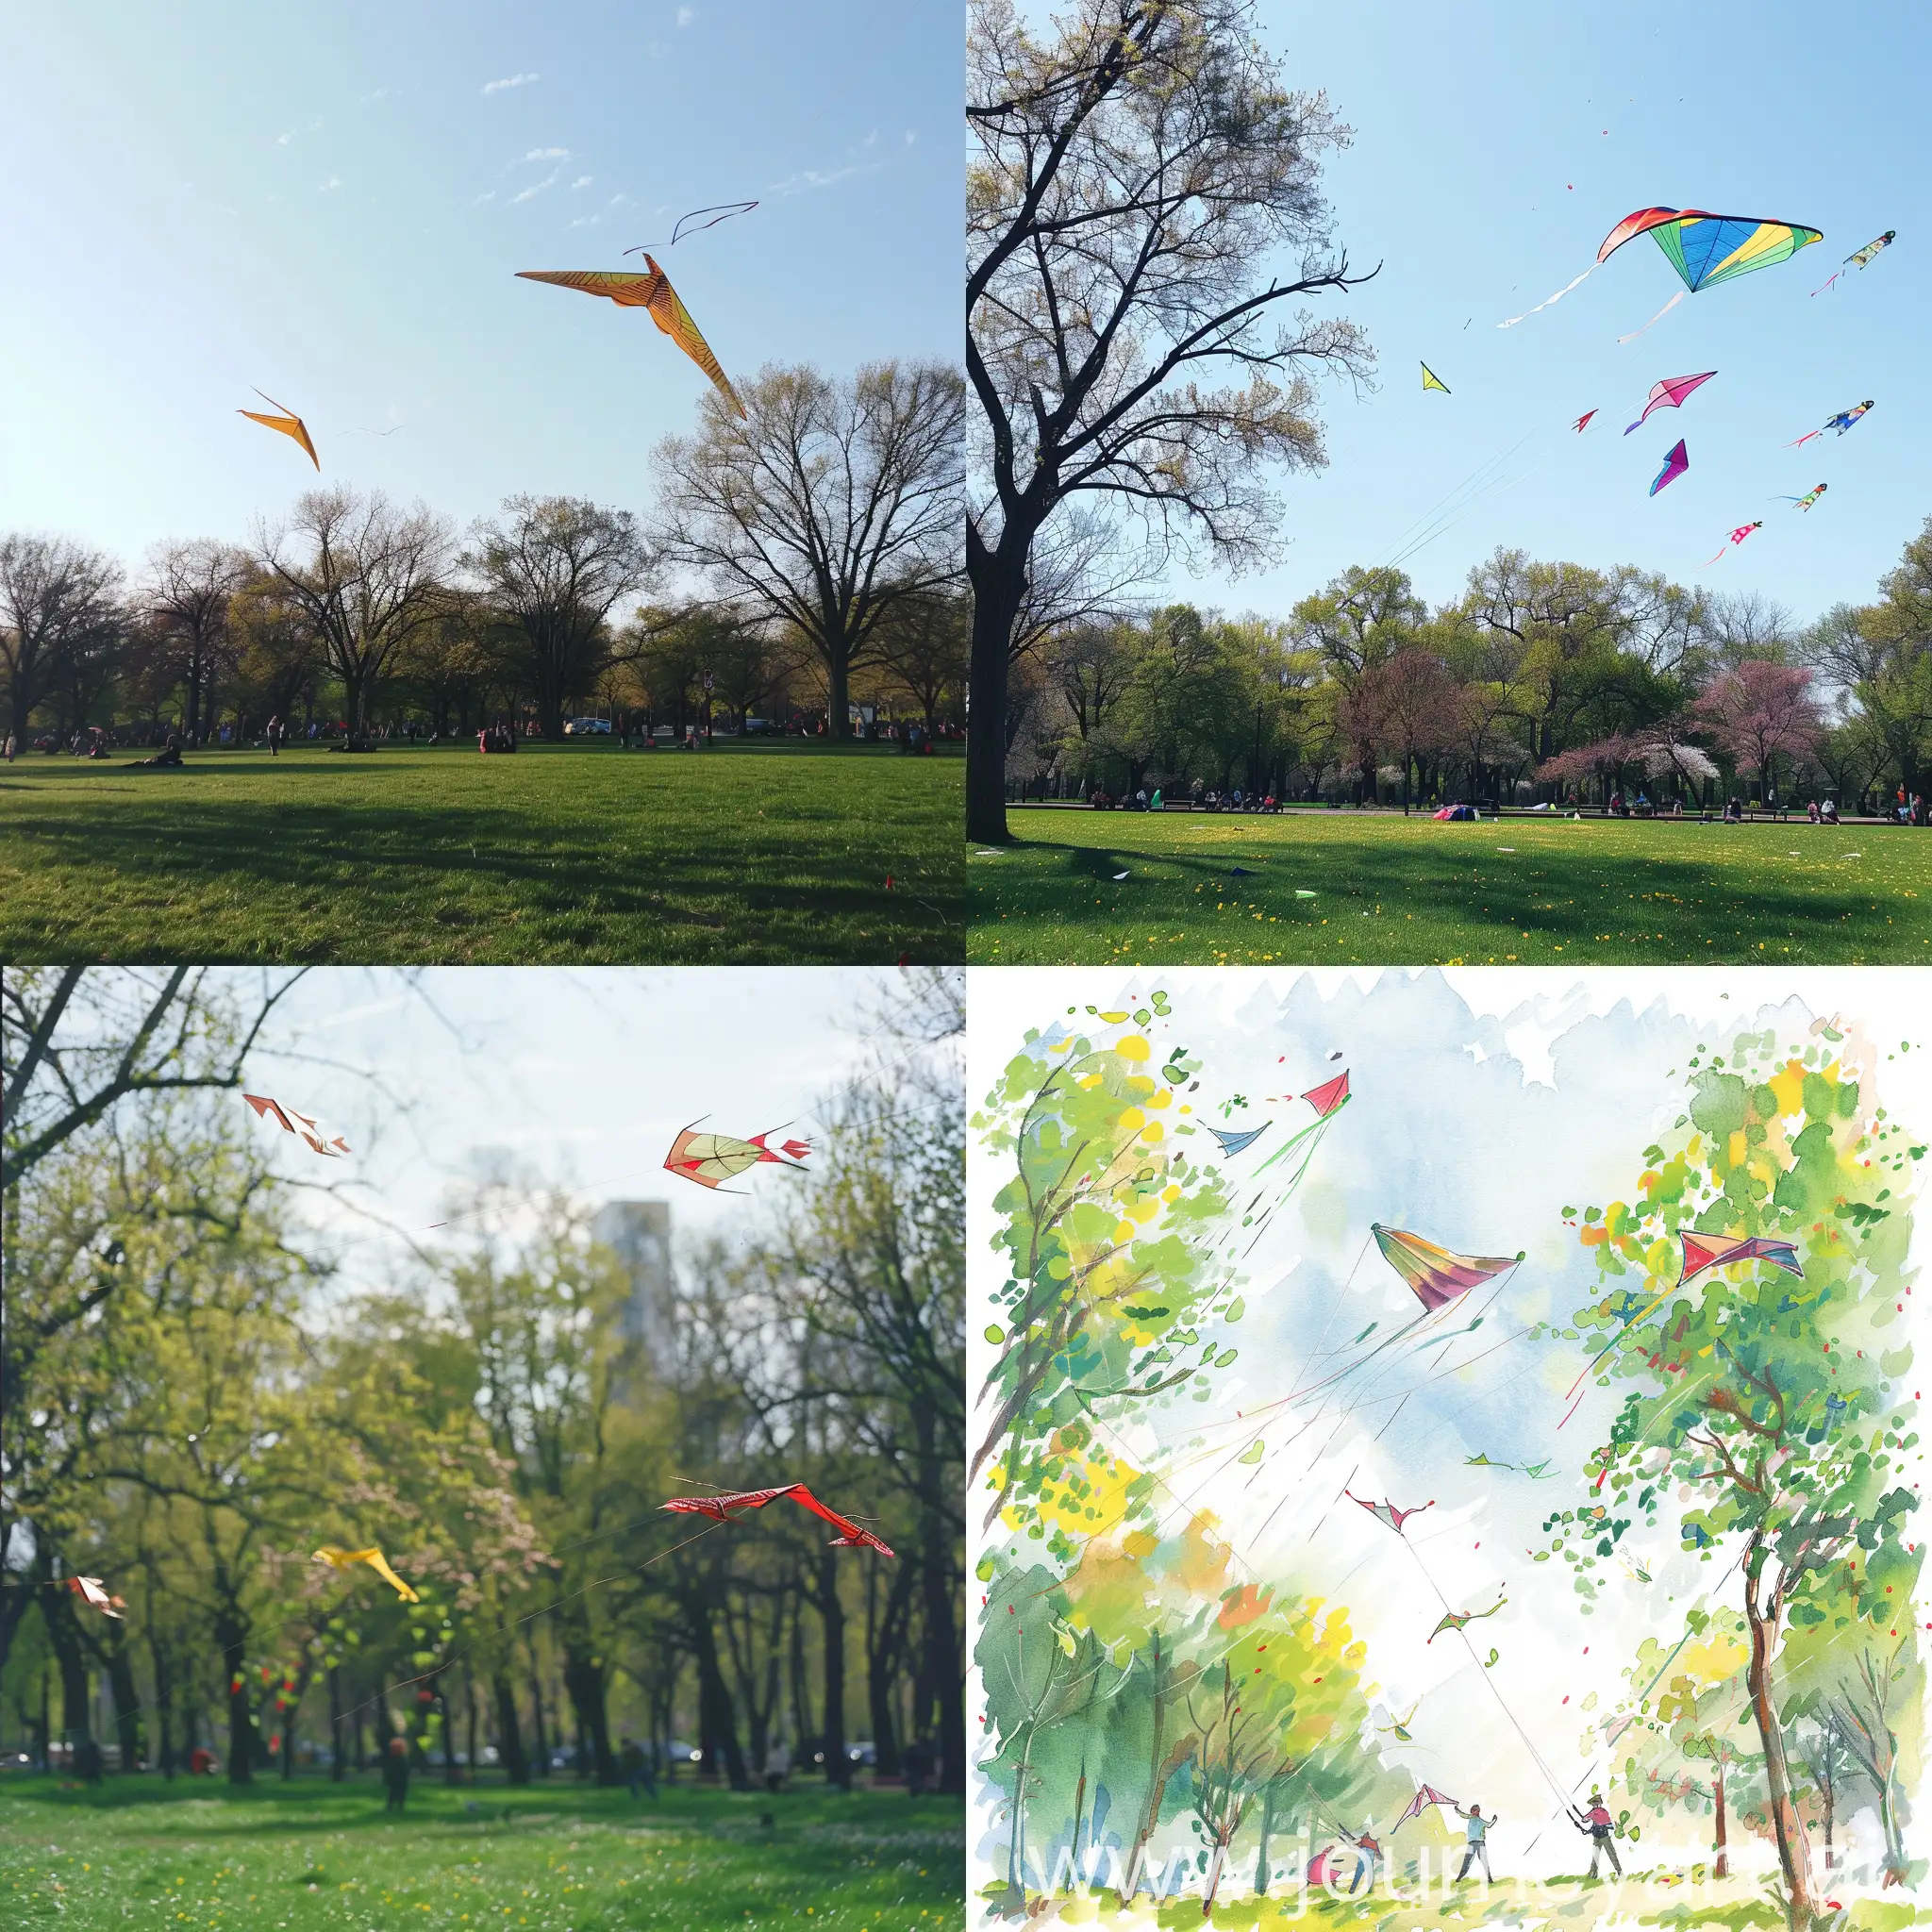 Spring-Afternoon-Fun-Flying-Kites-in-the-Park